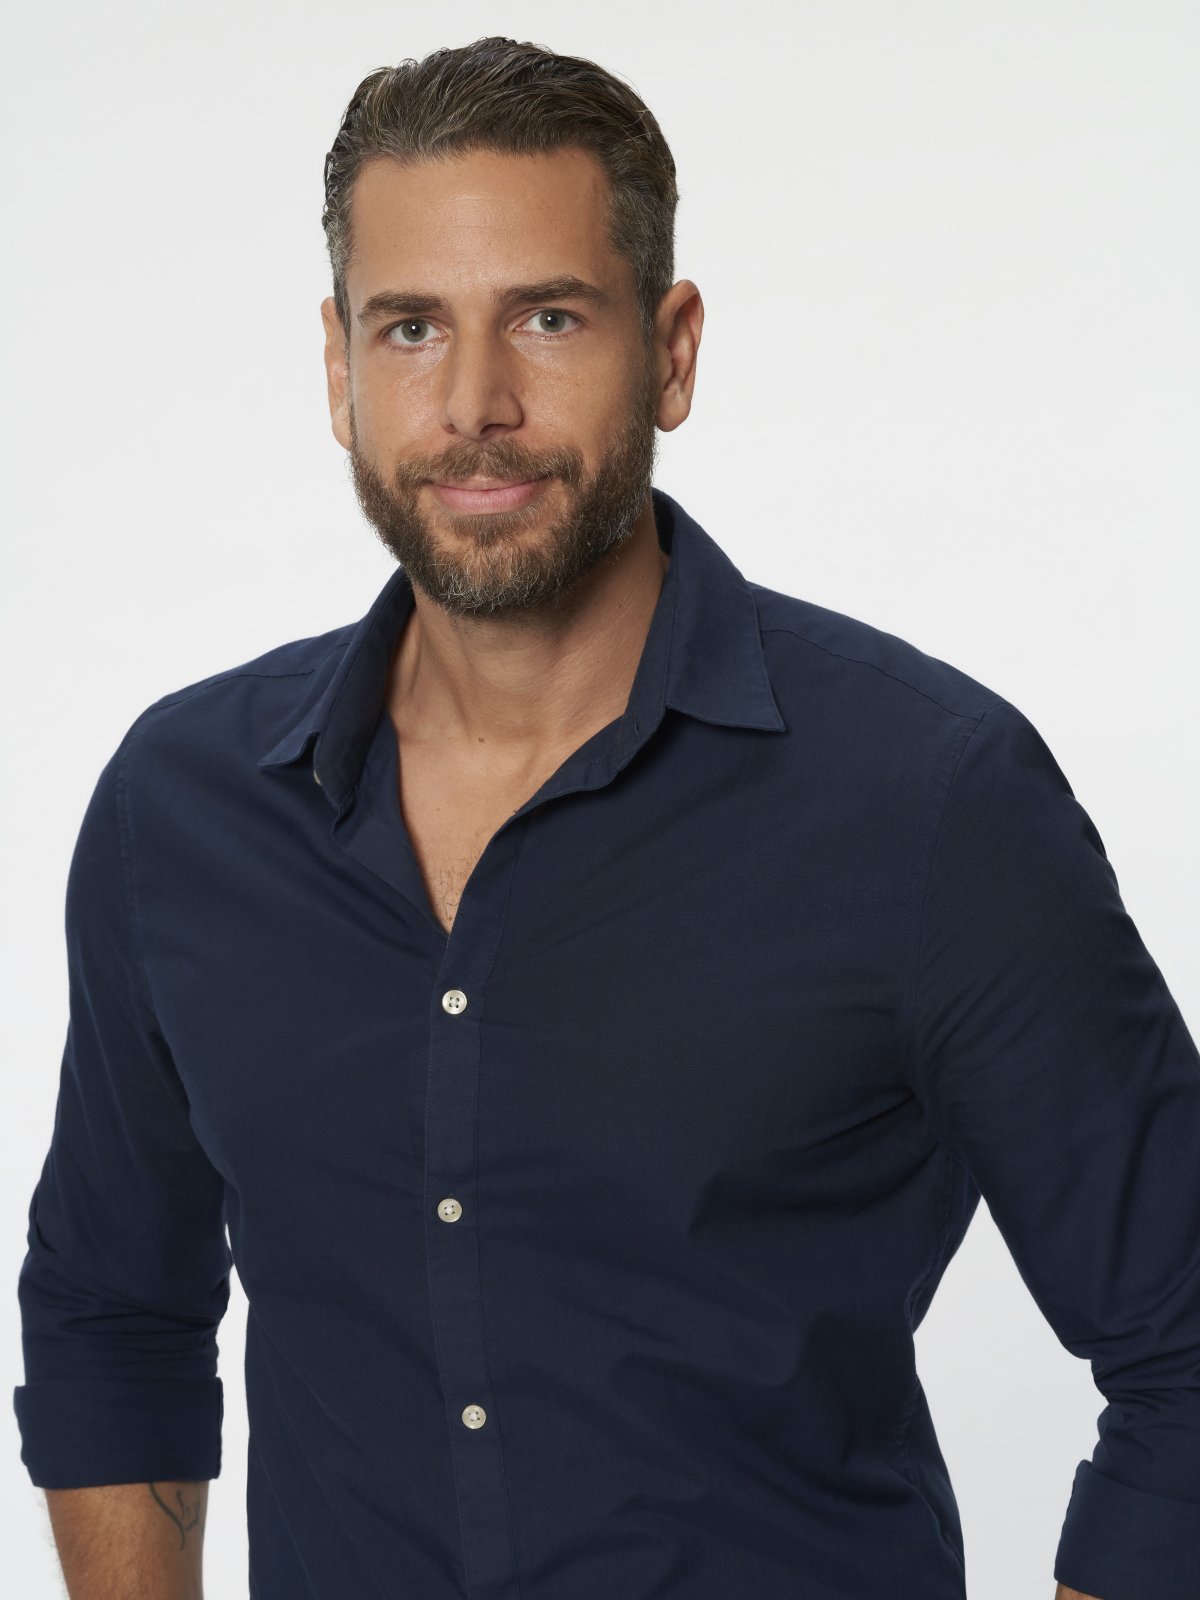 'The Bachelorette' star Michelle Young's 30 bachelors announced by ABC ...